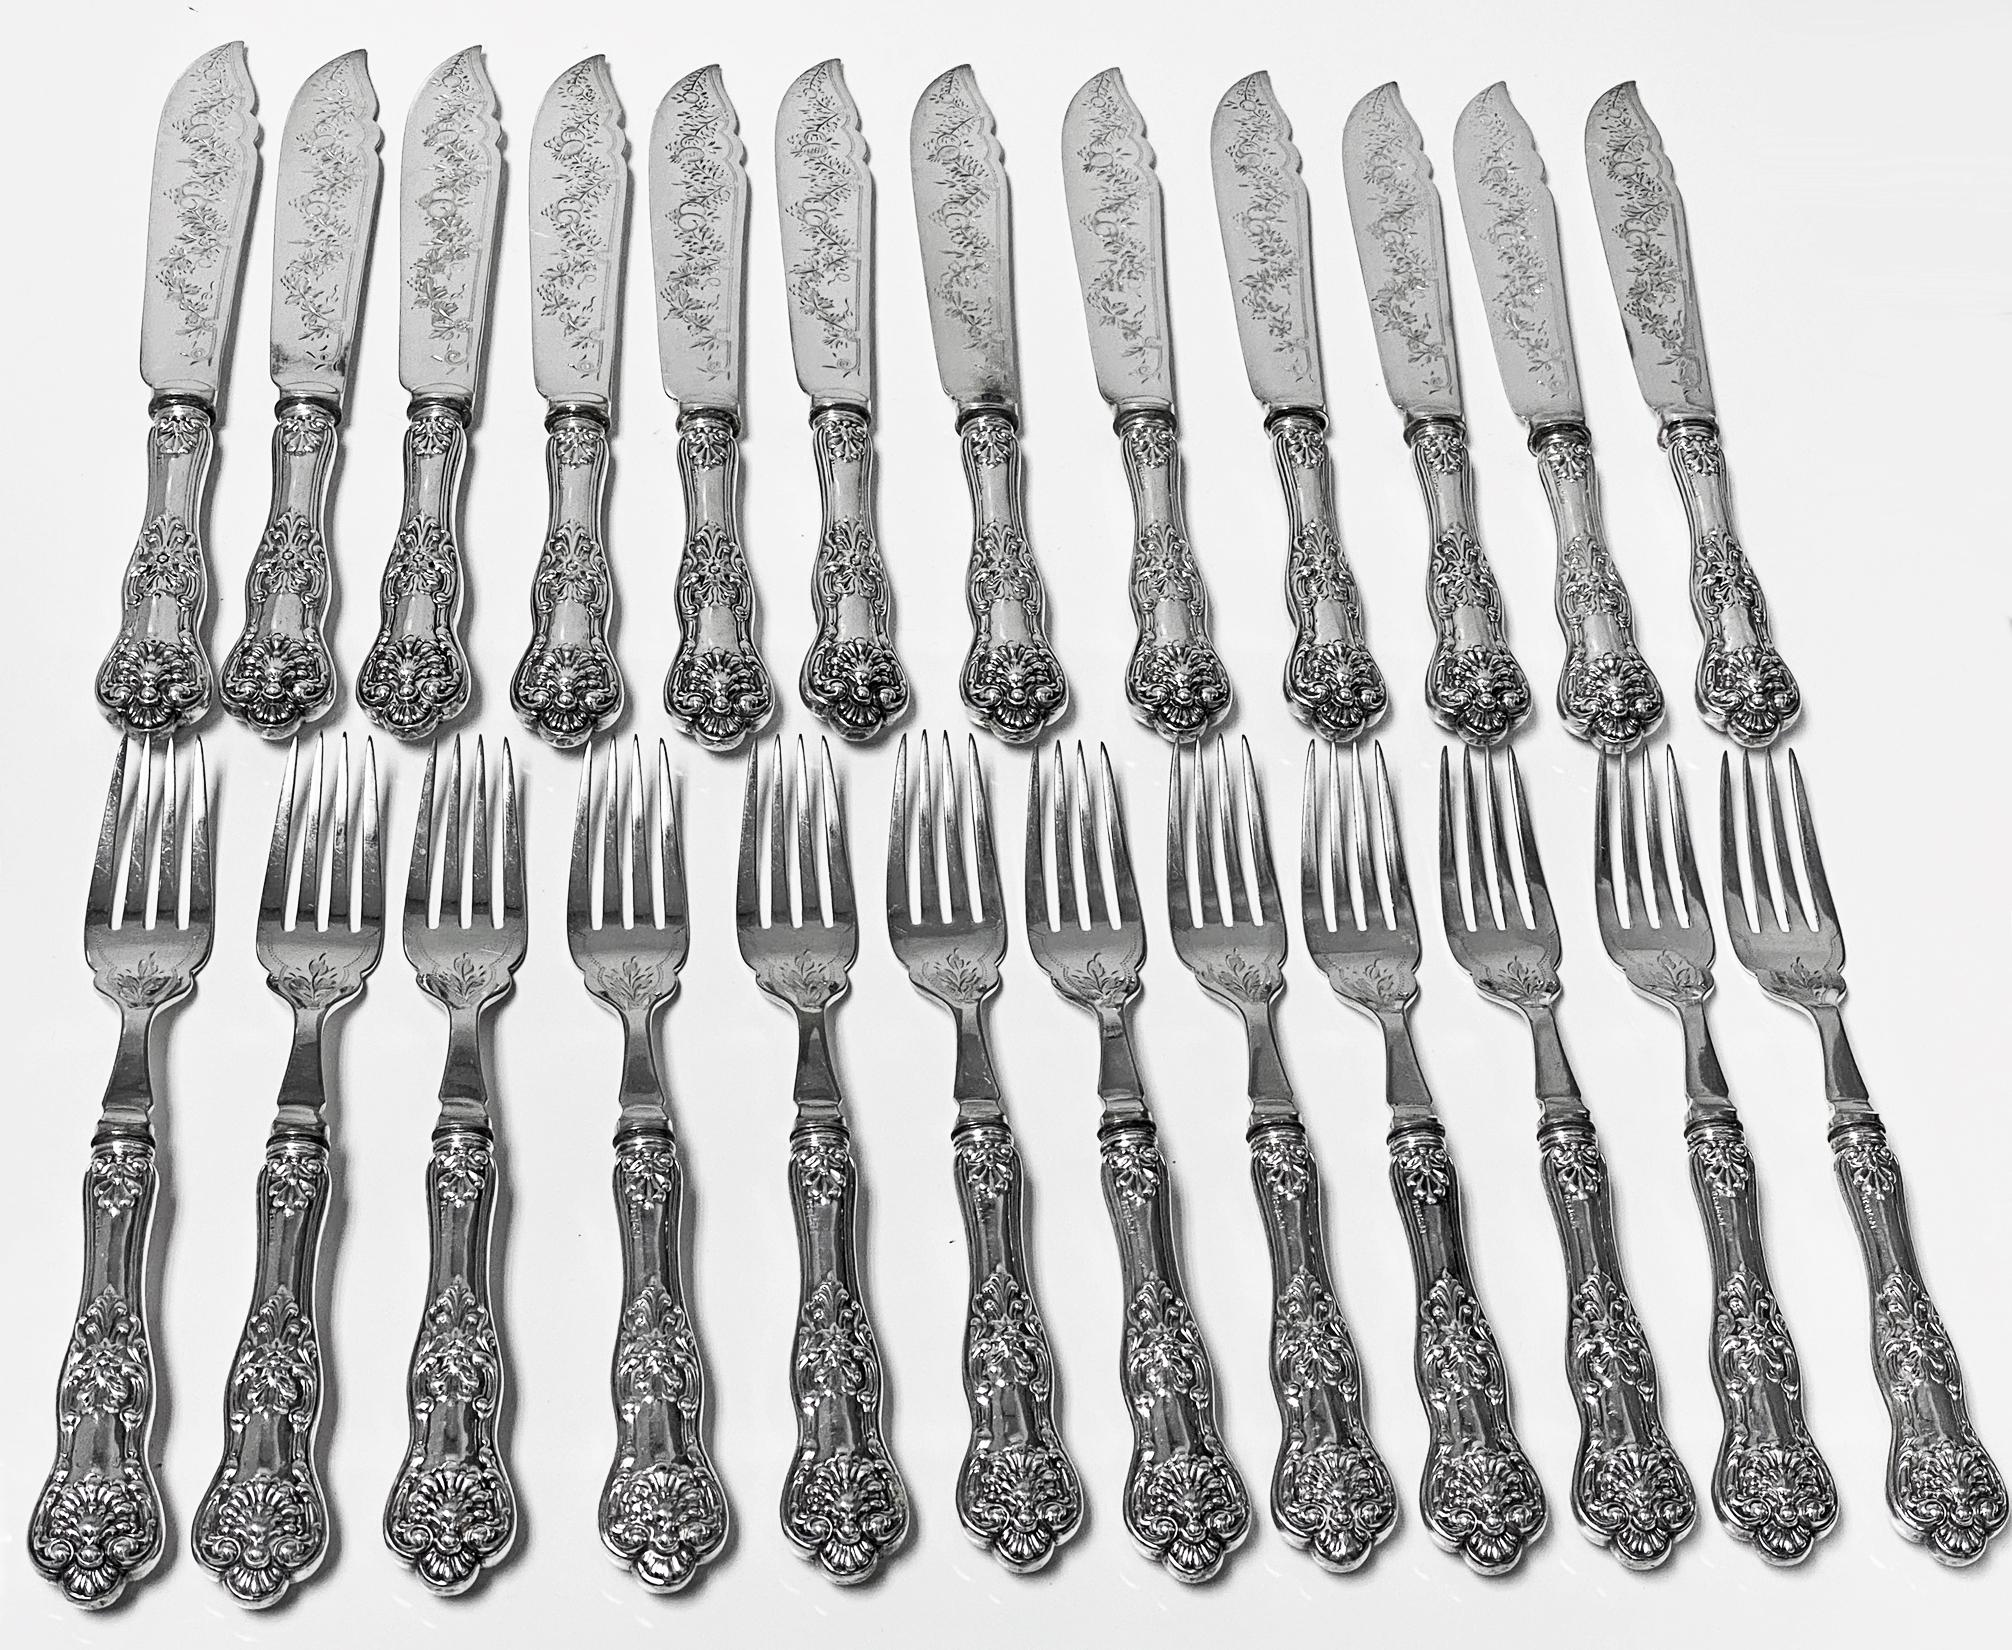 24-piece Sterling Silver Queens Pattern Fish Set C.1920. Set comprising 12 Fish Knives and 12 Fish Forks. All handles stamped Sterling, blades, and tines silver plate. Queens pattern handles, the blades and tines engraved foliage decoration. Lengths